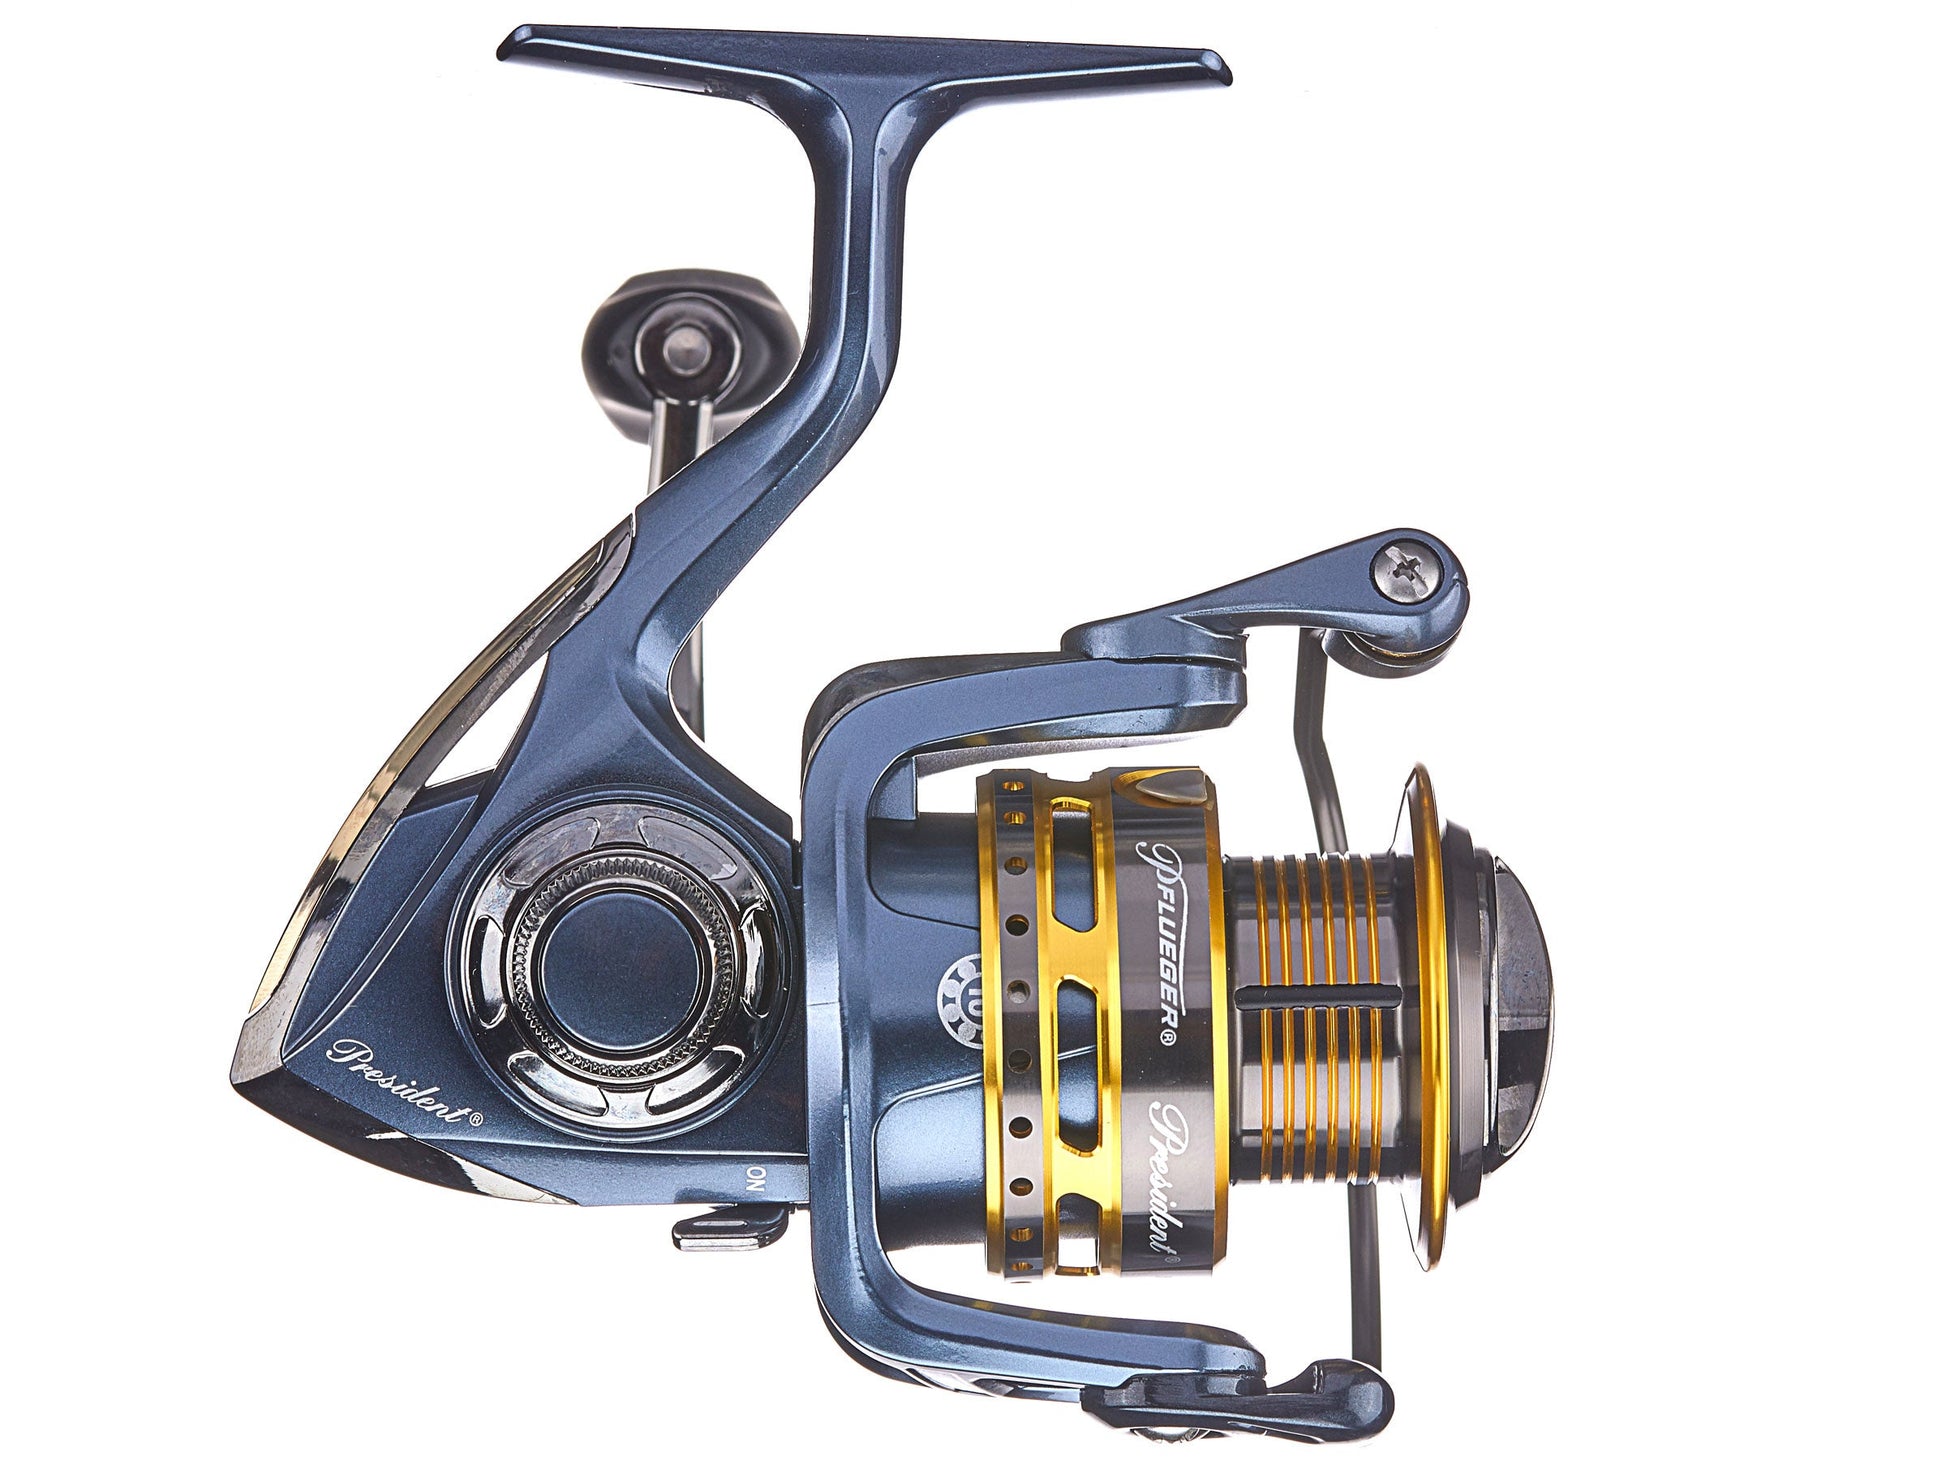 Pflueger President Spinning Reel – Lures and Lead